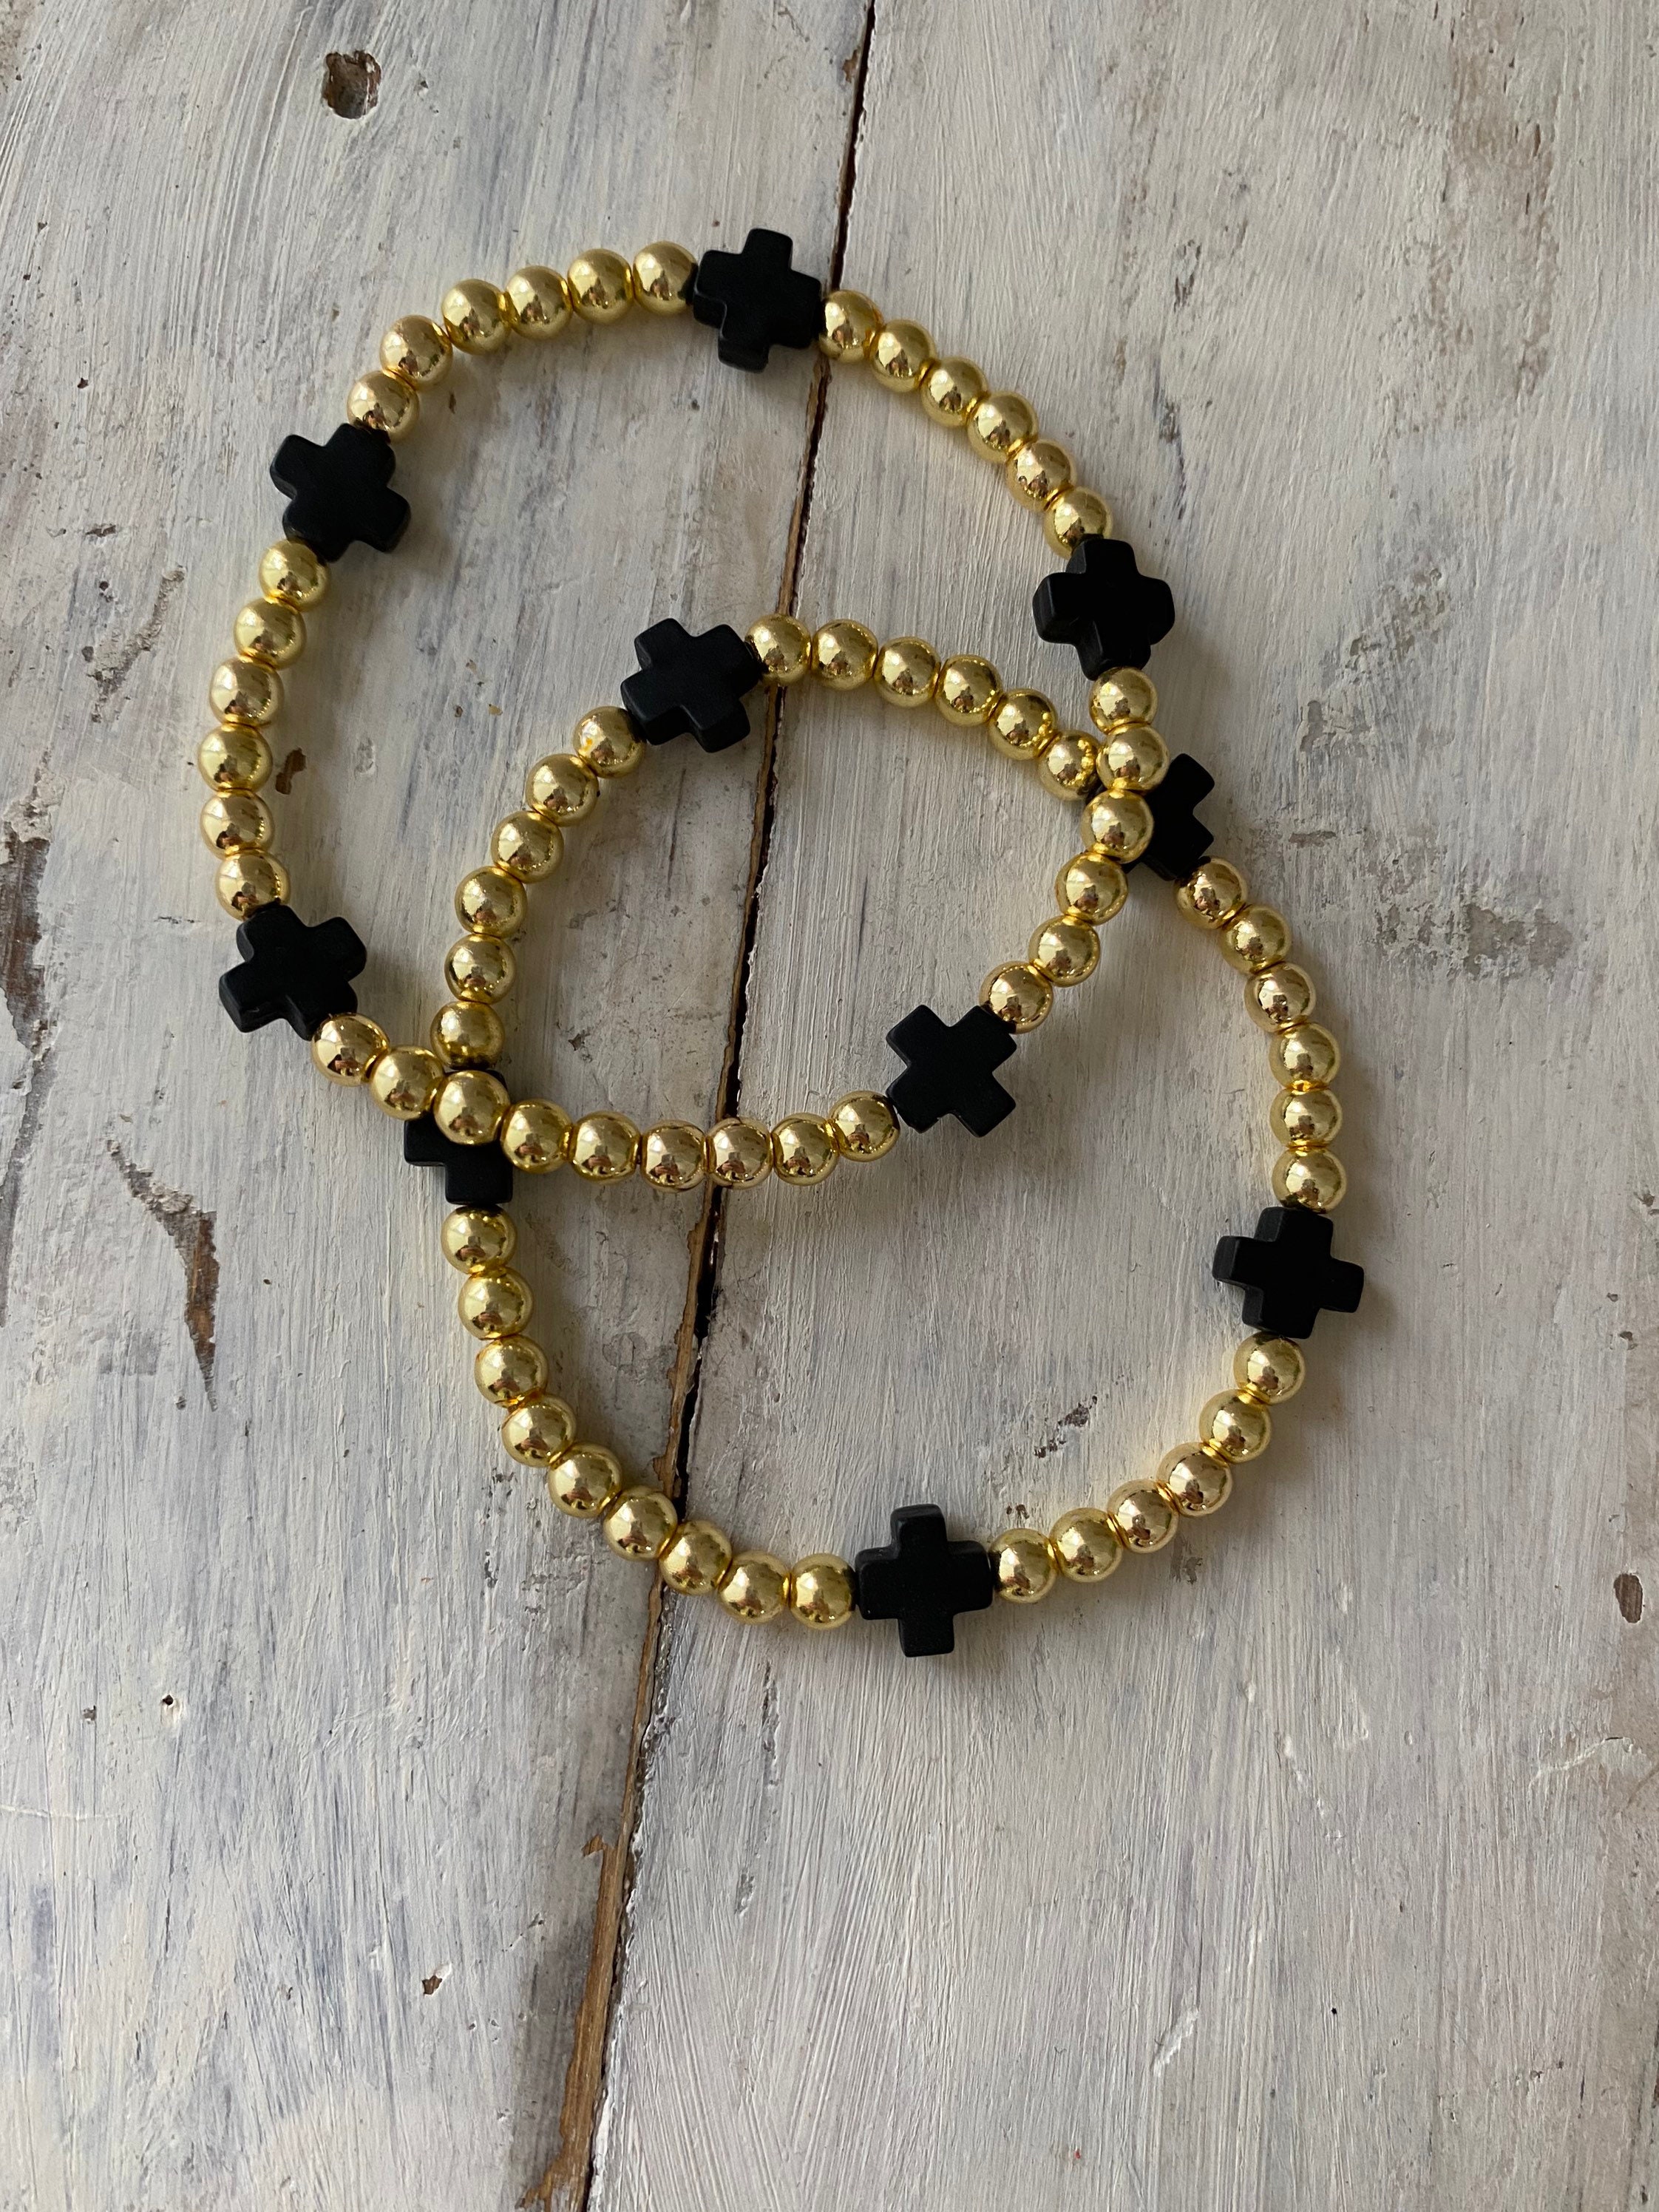 Gold Fill Cross Bead Bracelets – R and D Beads